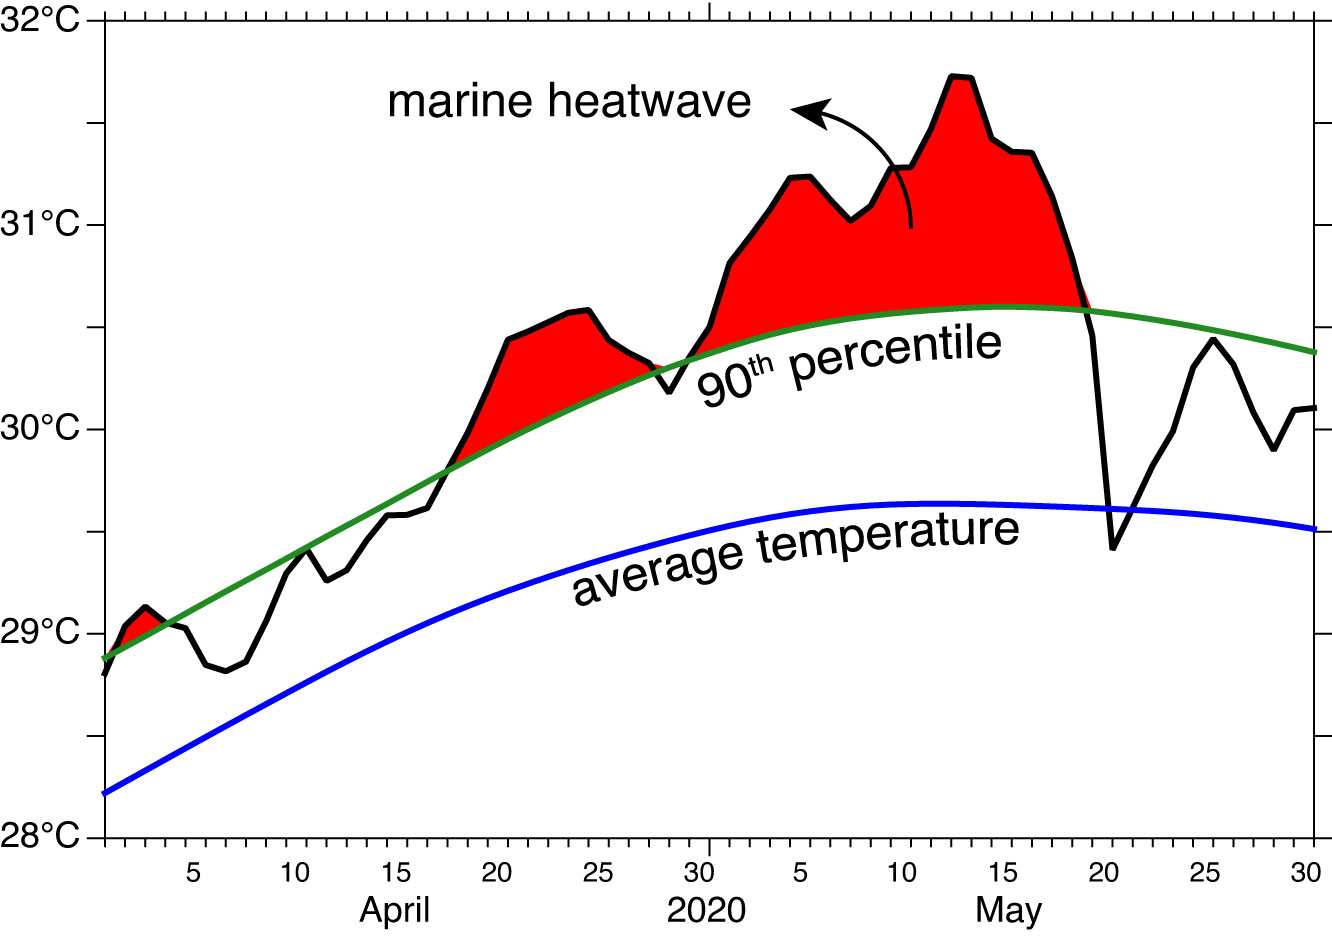 marine heatwave with average temperatures and 90th percentile